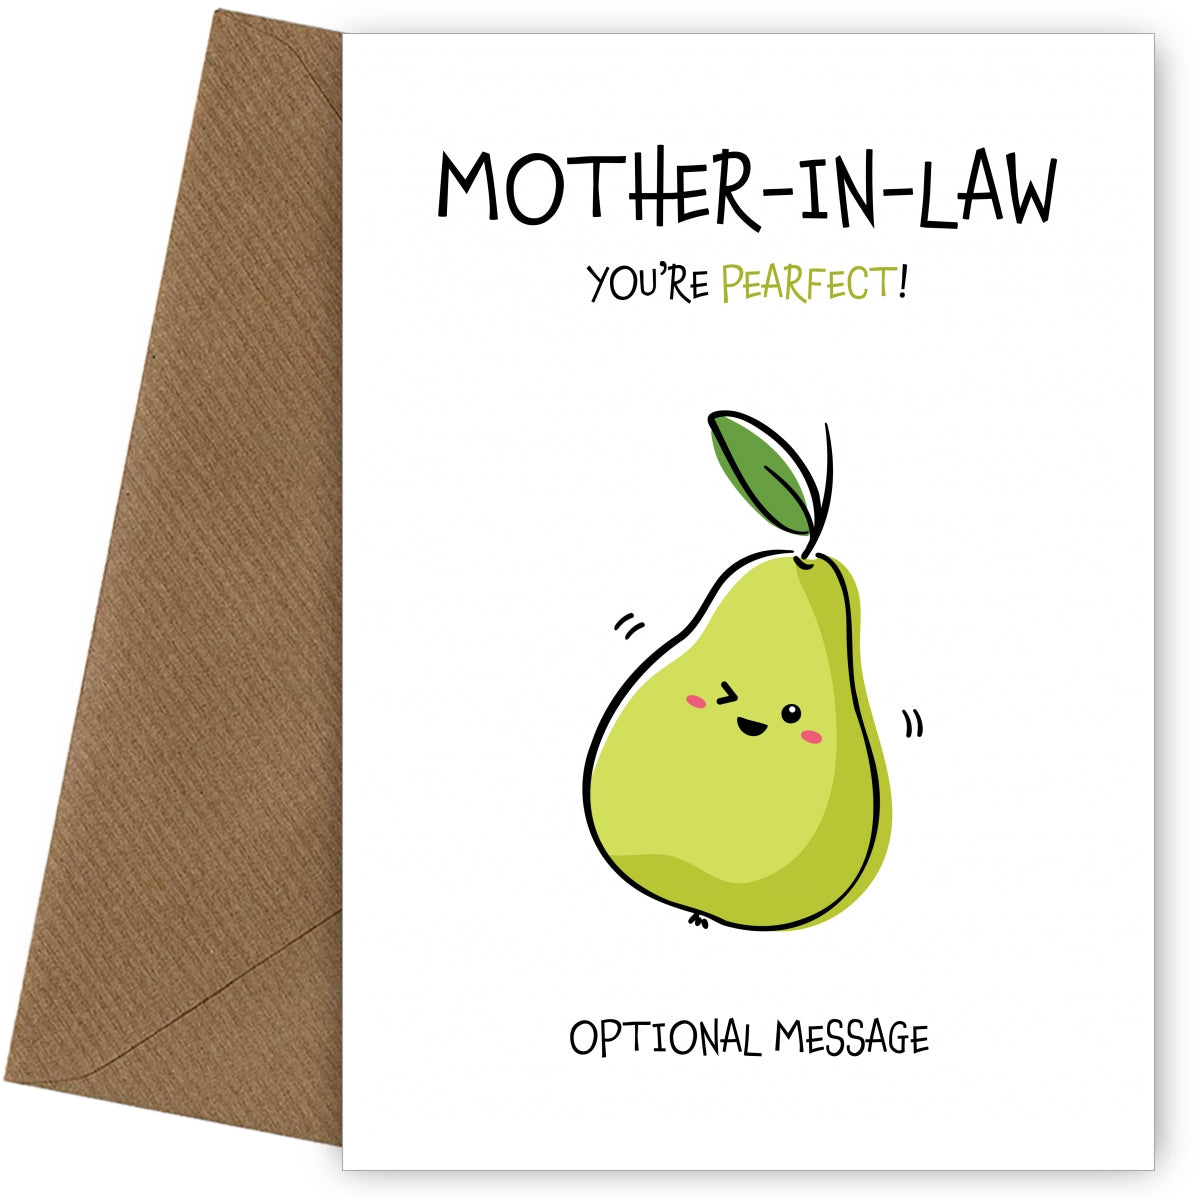 Fruit Pun Birthday Day Card for Mother-in-law - You're Perfect